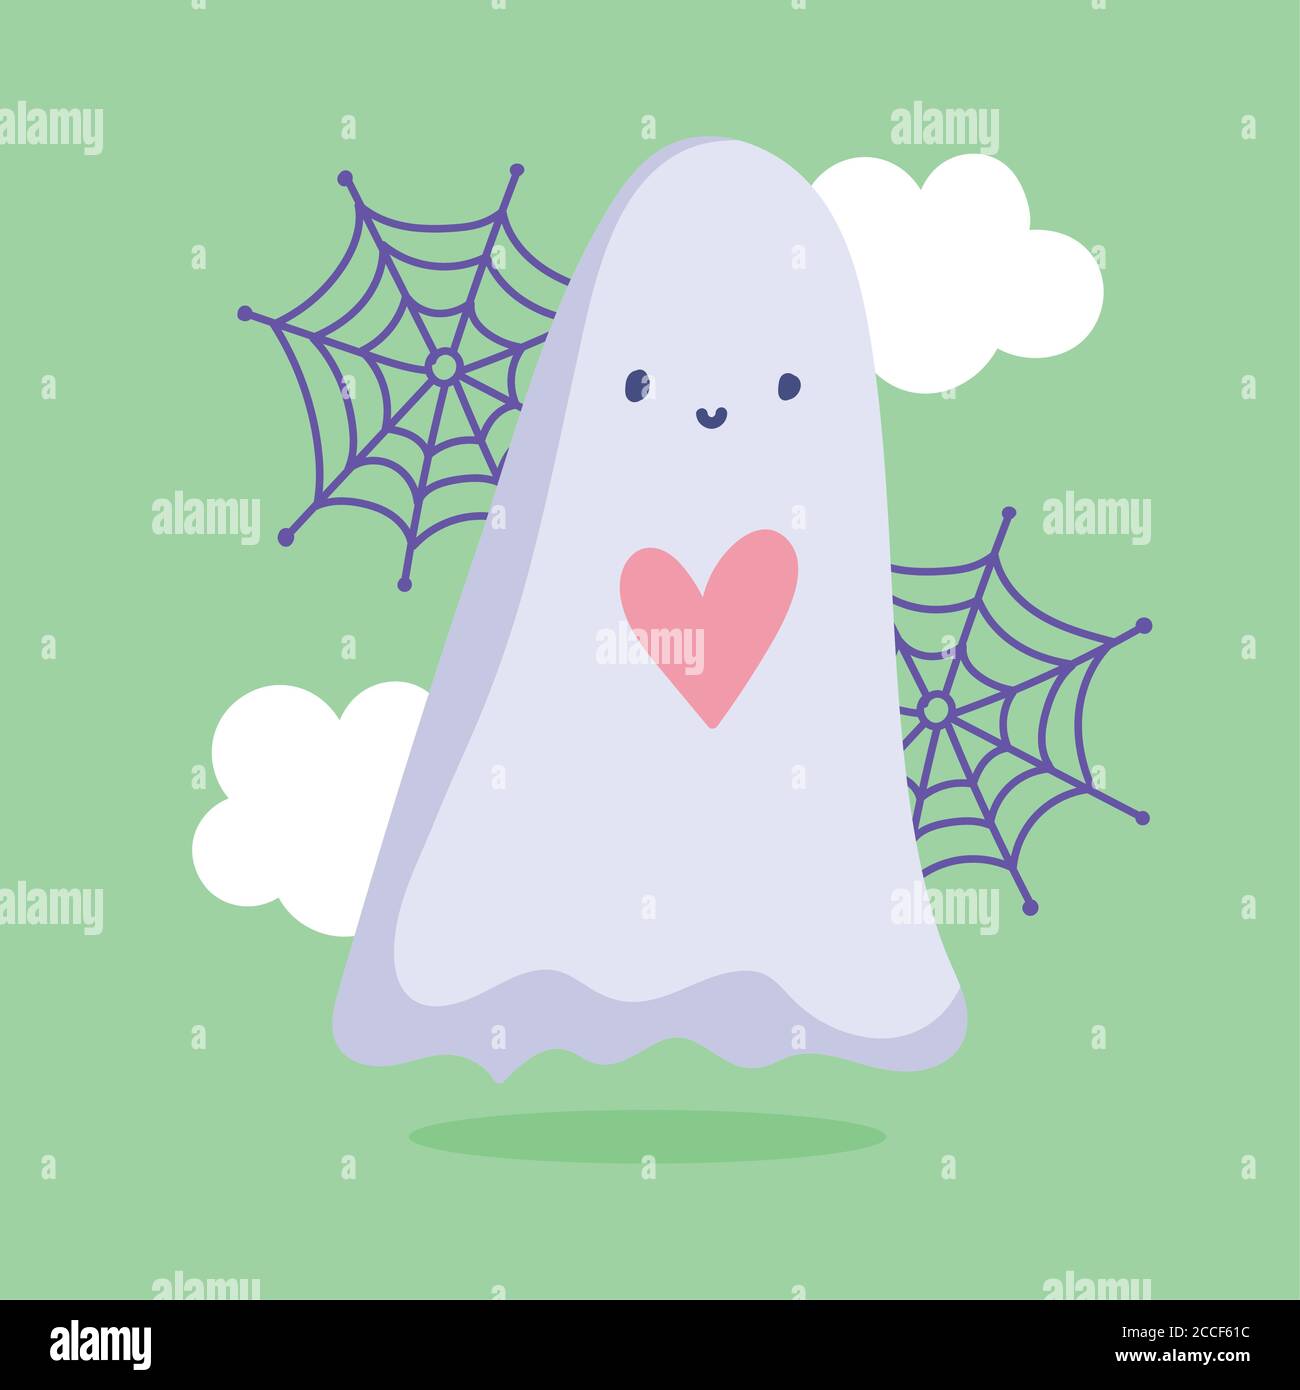 3” Sticker Spooky Spider Web Heart Cute Halloween Party Trick Or Treat Goth Fun